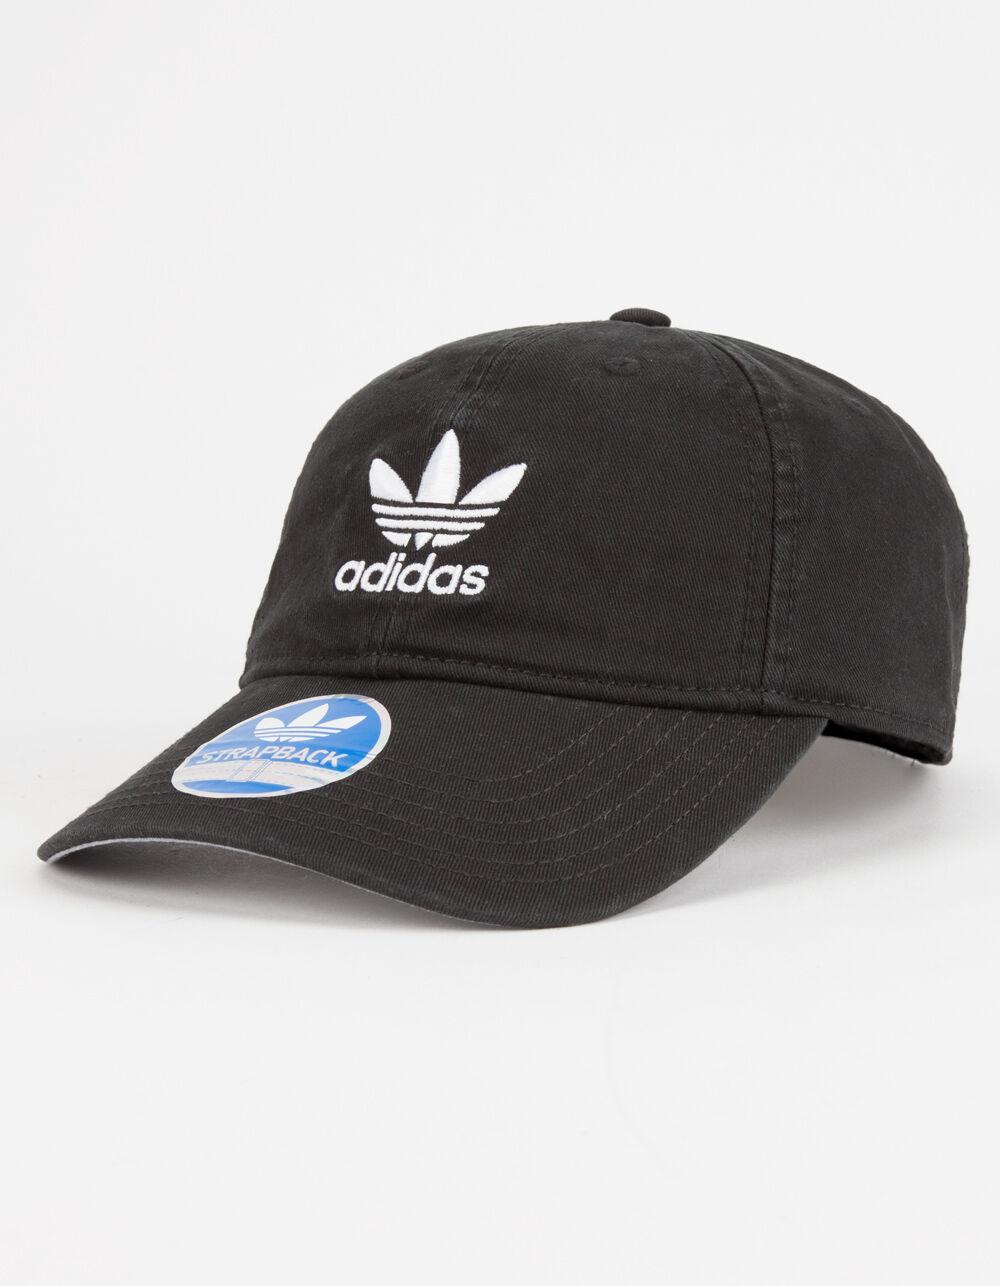 adidas Cotton Originals Relaxed Mens Dad Hat in Black/White (Black) for